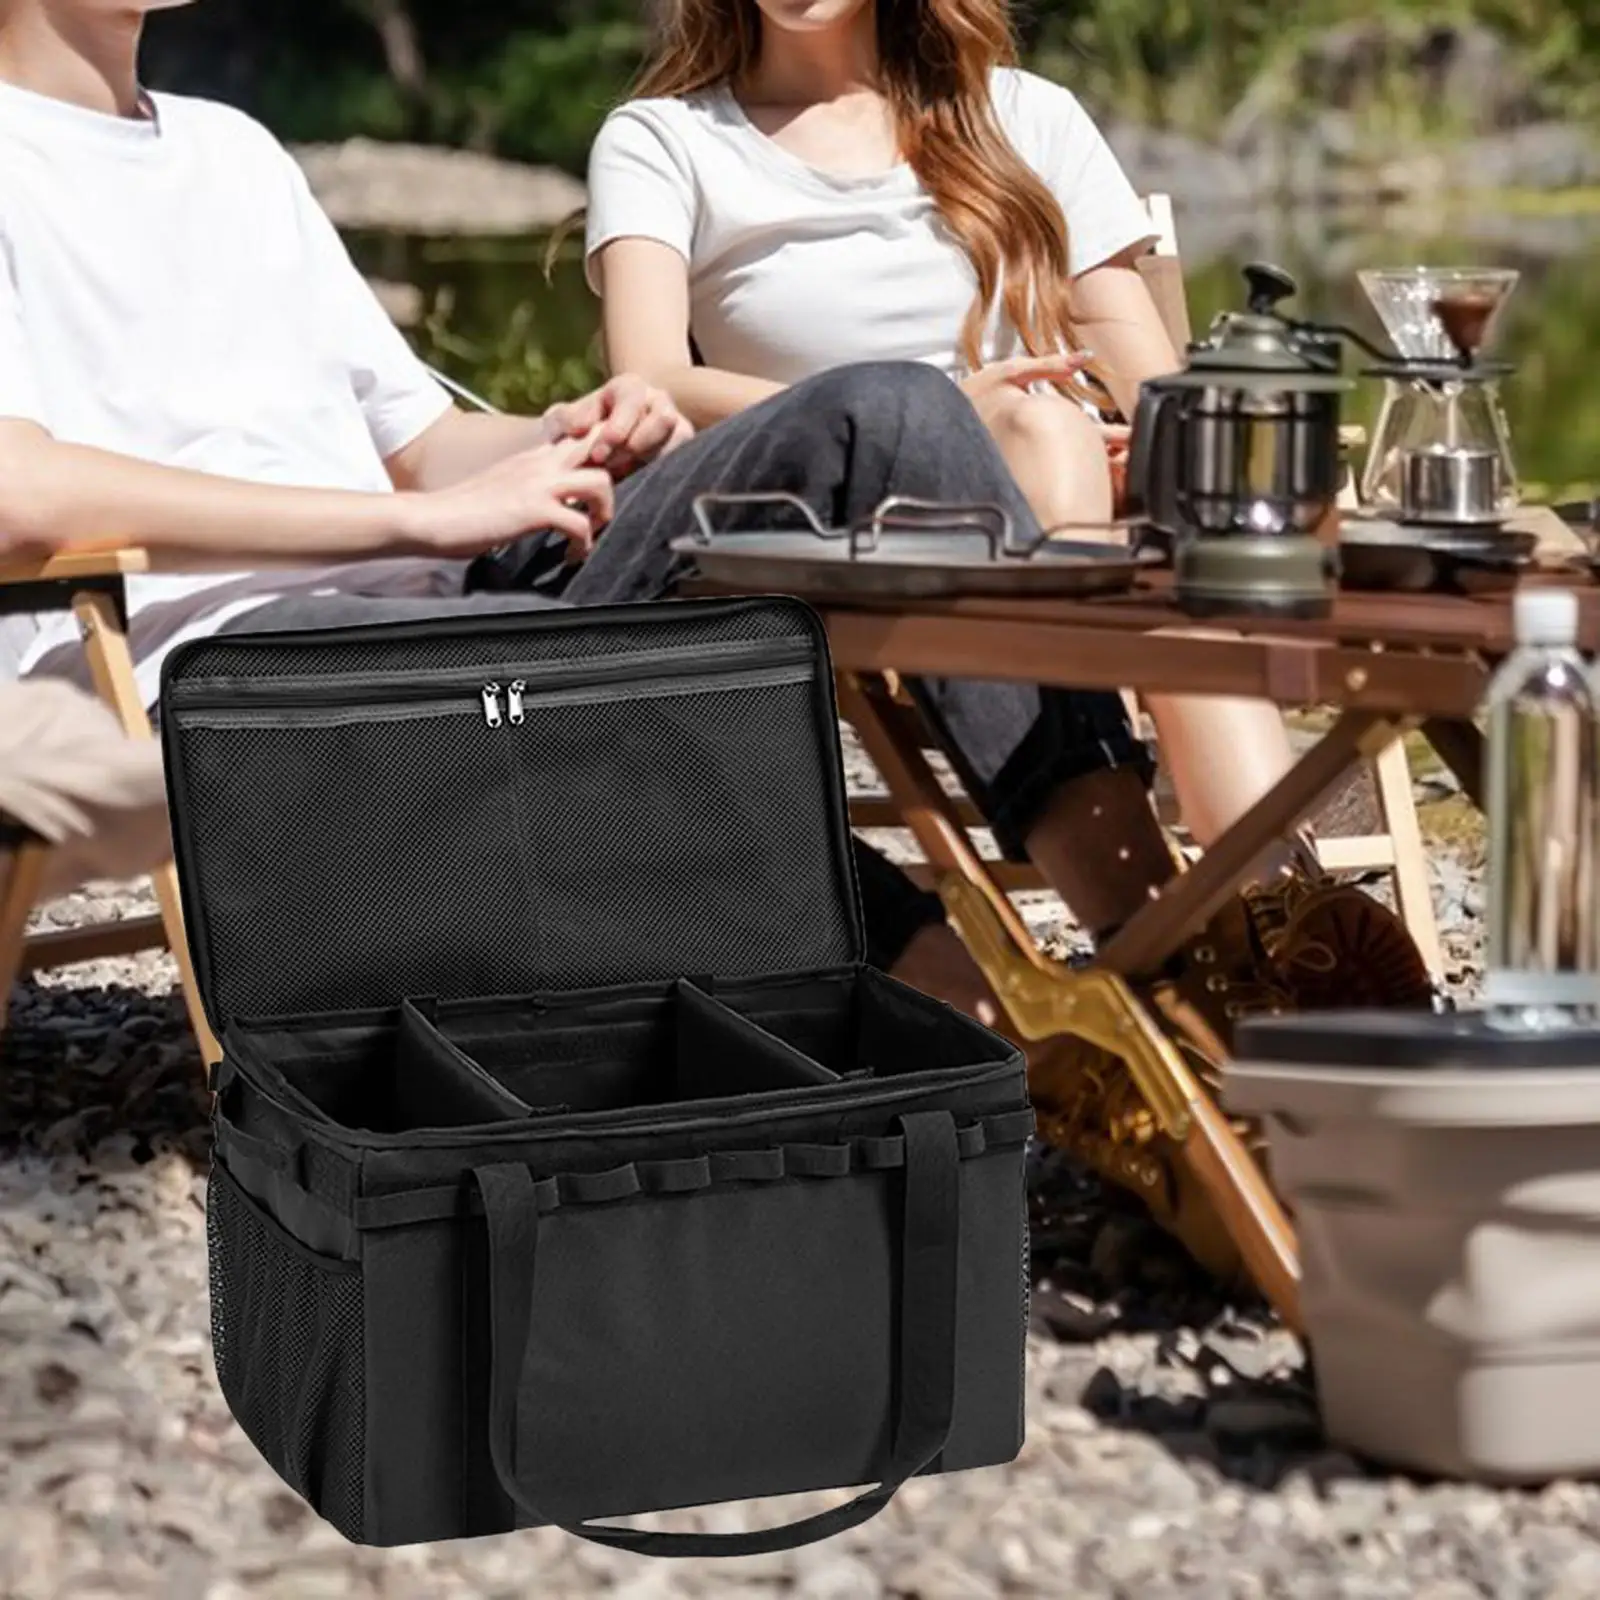 Insulated Wine Cooler Bag Keeps Wine Cold Gift Waterproof Men Women Single Bottle Wine Tote Bag for Outdoor Sports Party Picnic